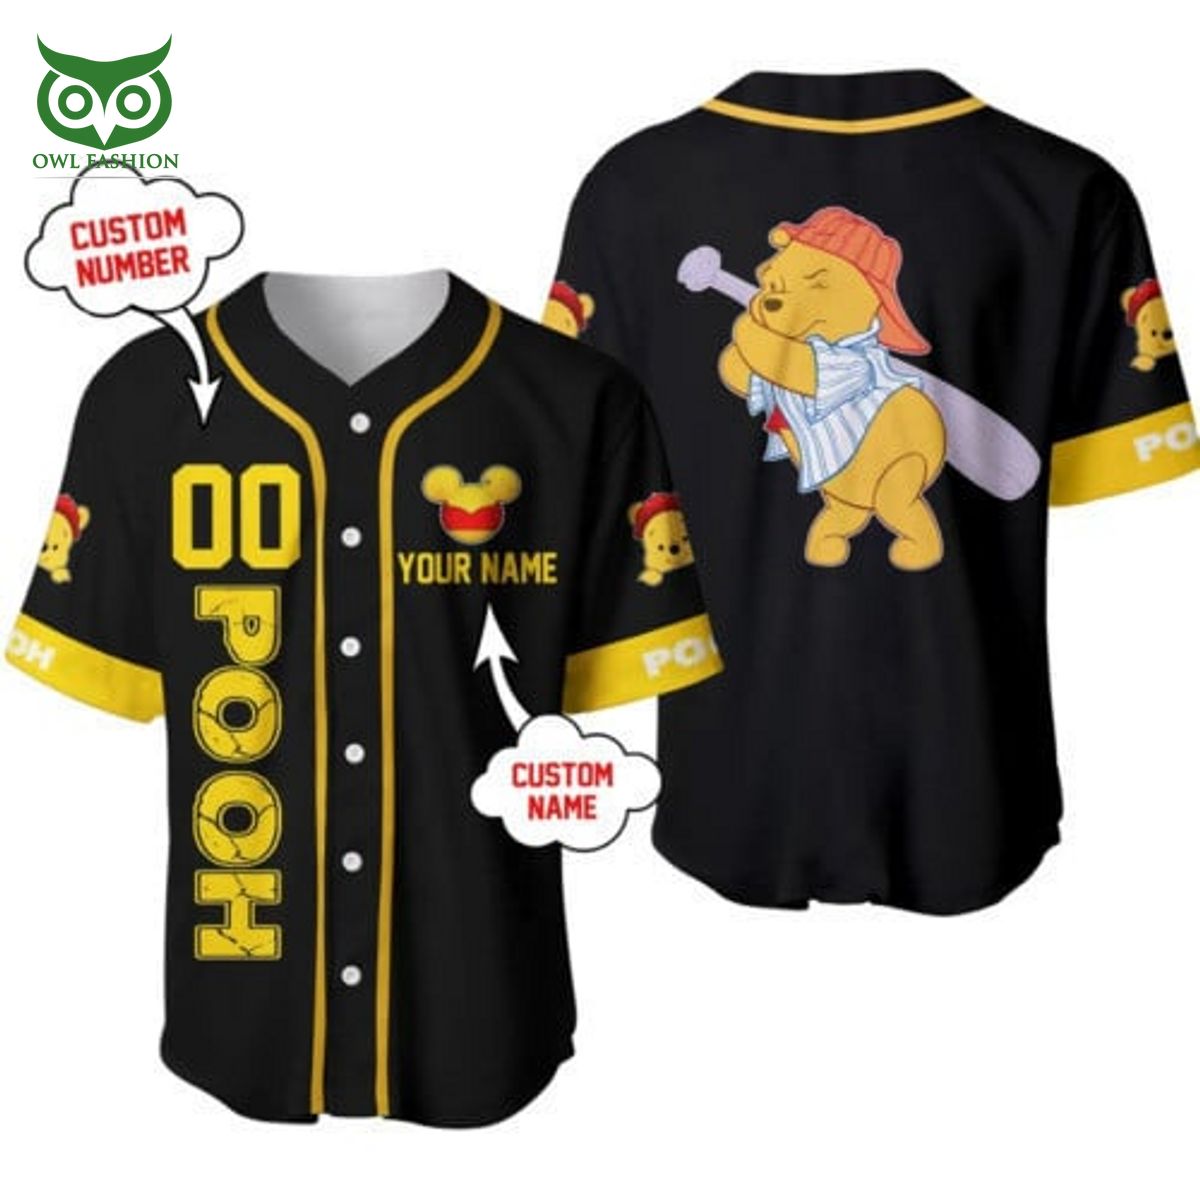 Winnie The Pooh Black Personalized Baseball Jersey Shirt Ah! It is marvellous